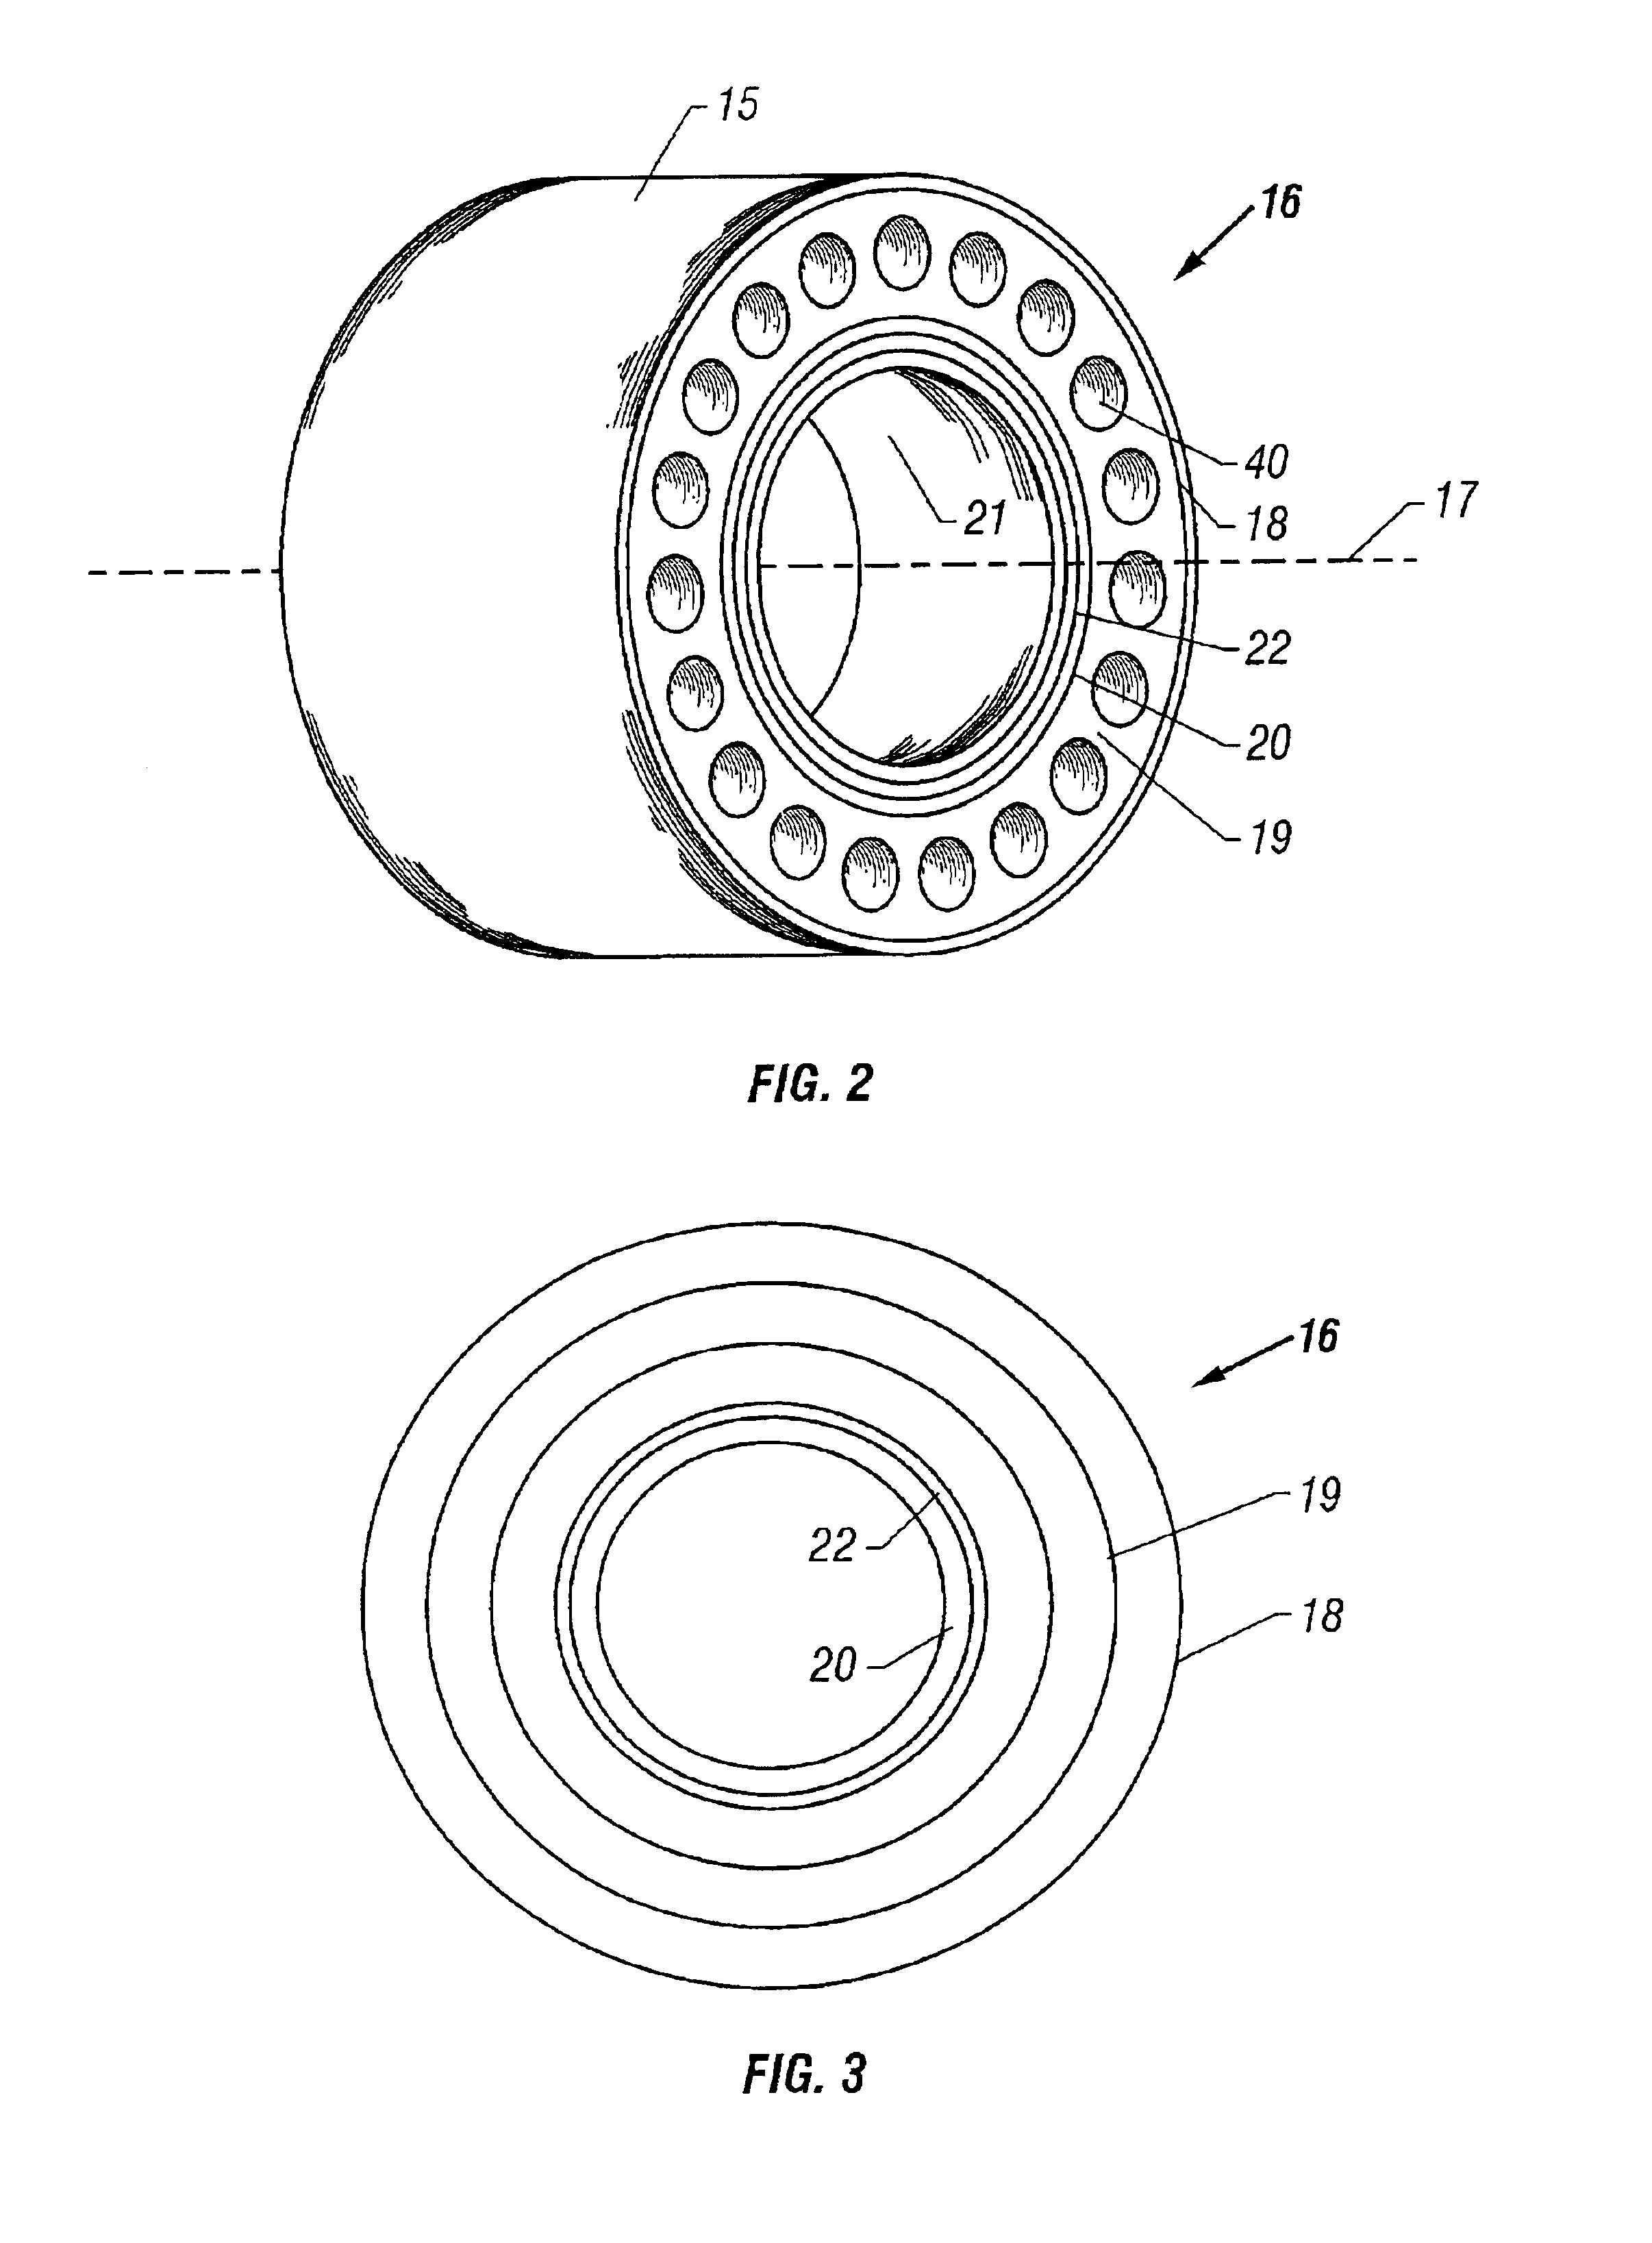 Method of manufacturing a filament formed reinforcement member and a run flat tire support therewith